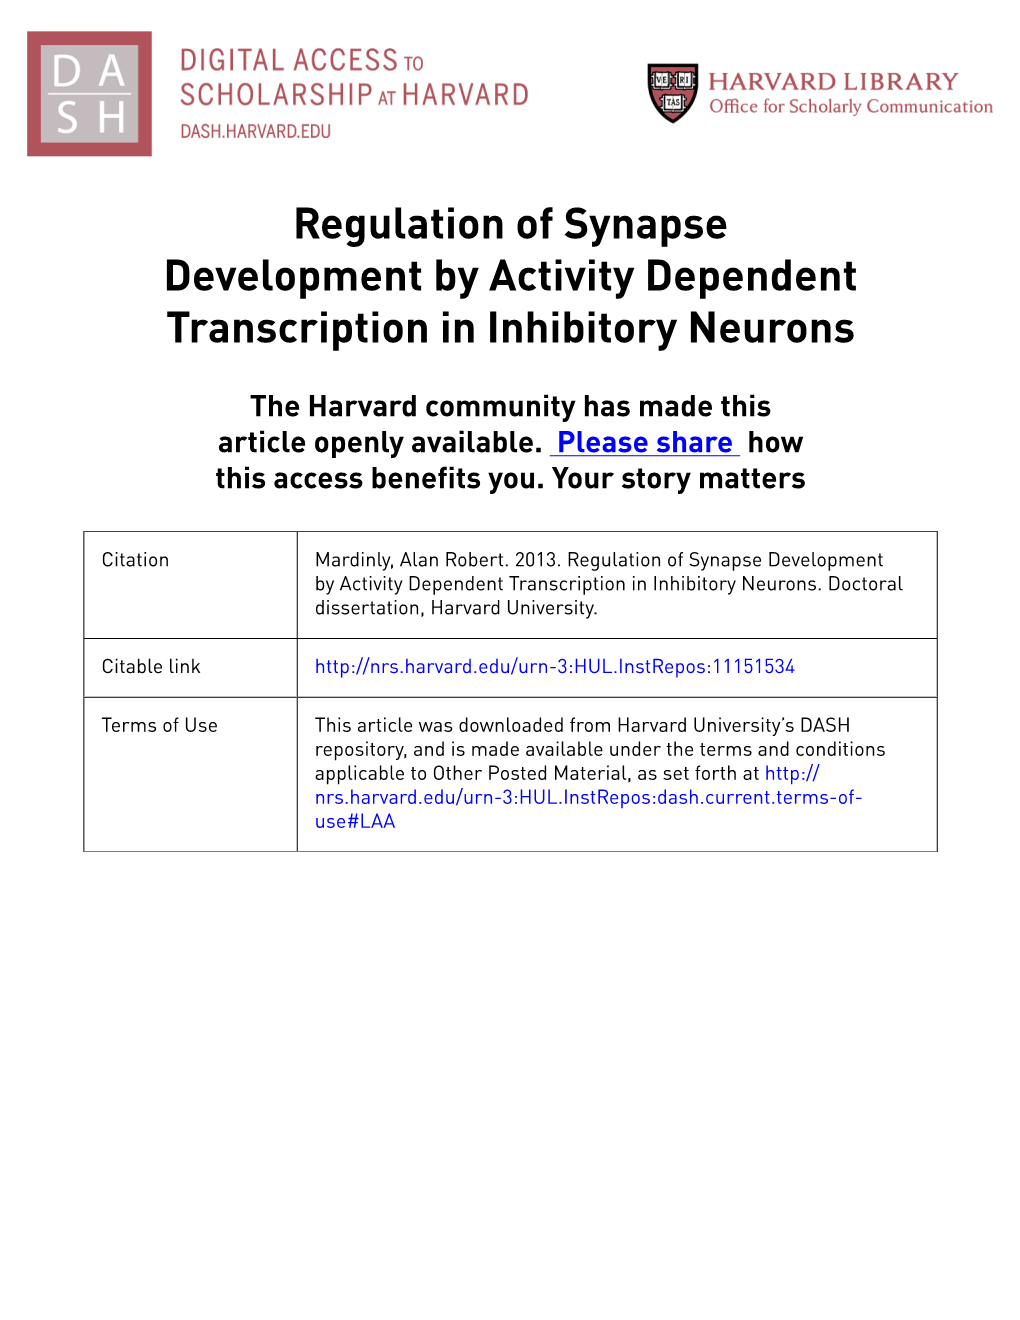 Regulation of Synapse Development by Activity Dependent Transcription in Inhibitory Neurons